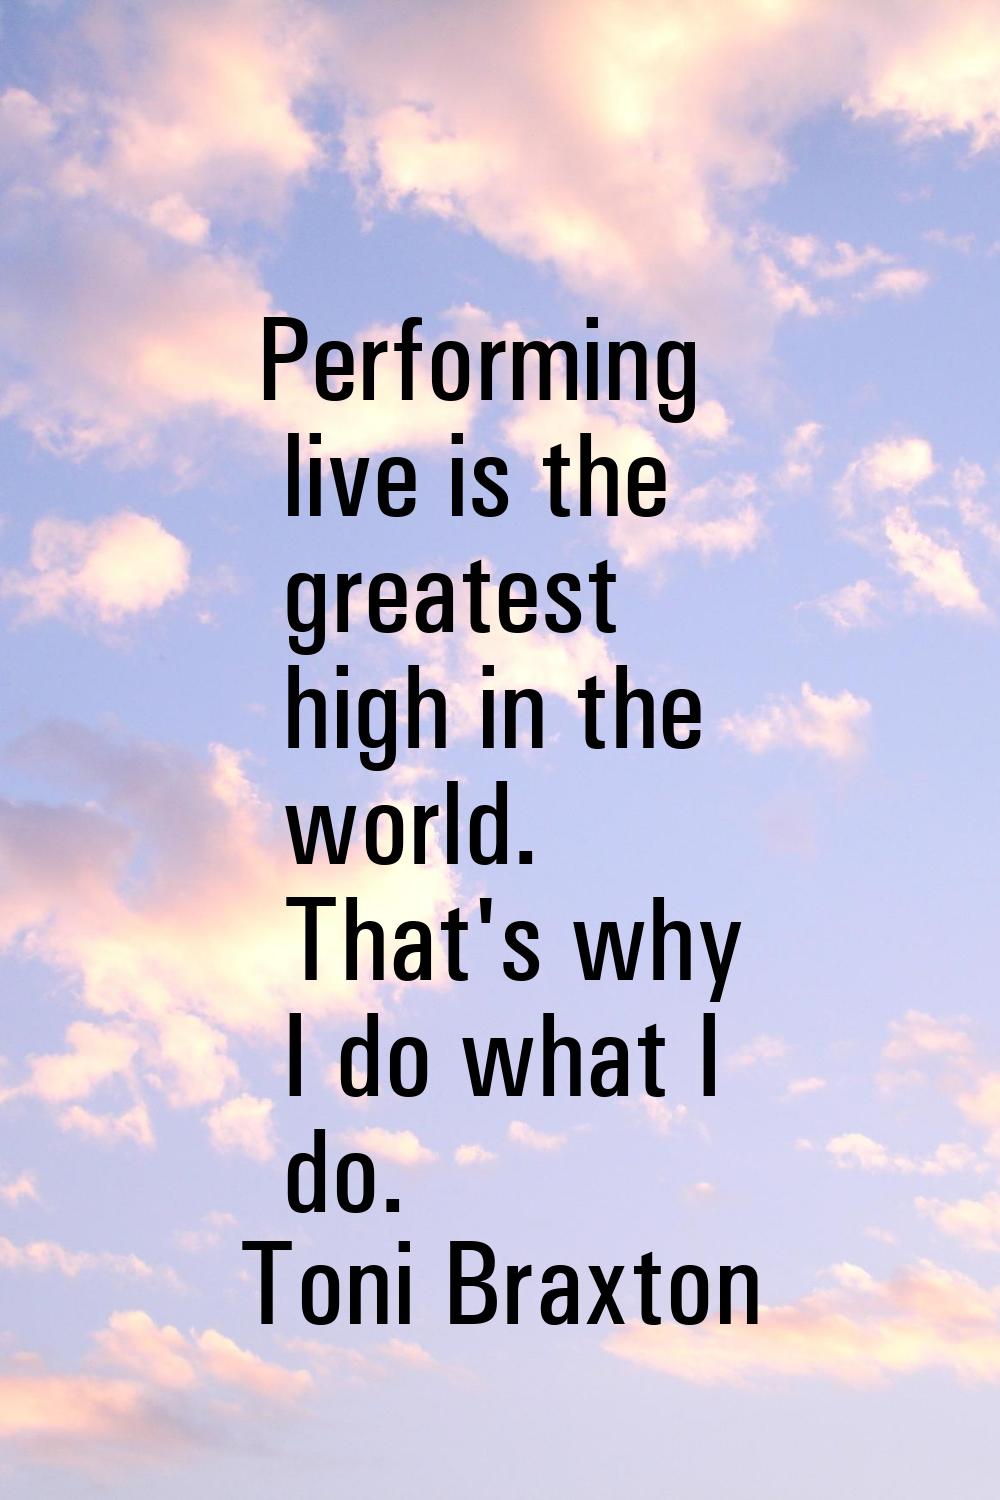 Performing live is the greatest high in the world. That's why I do what I do.